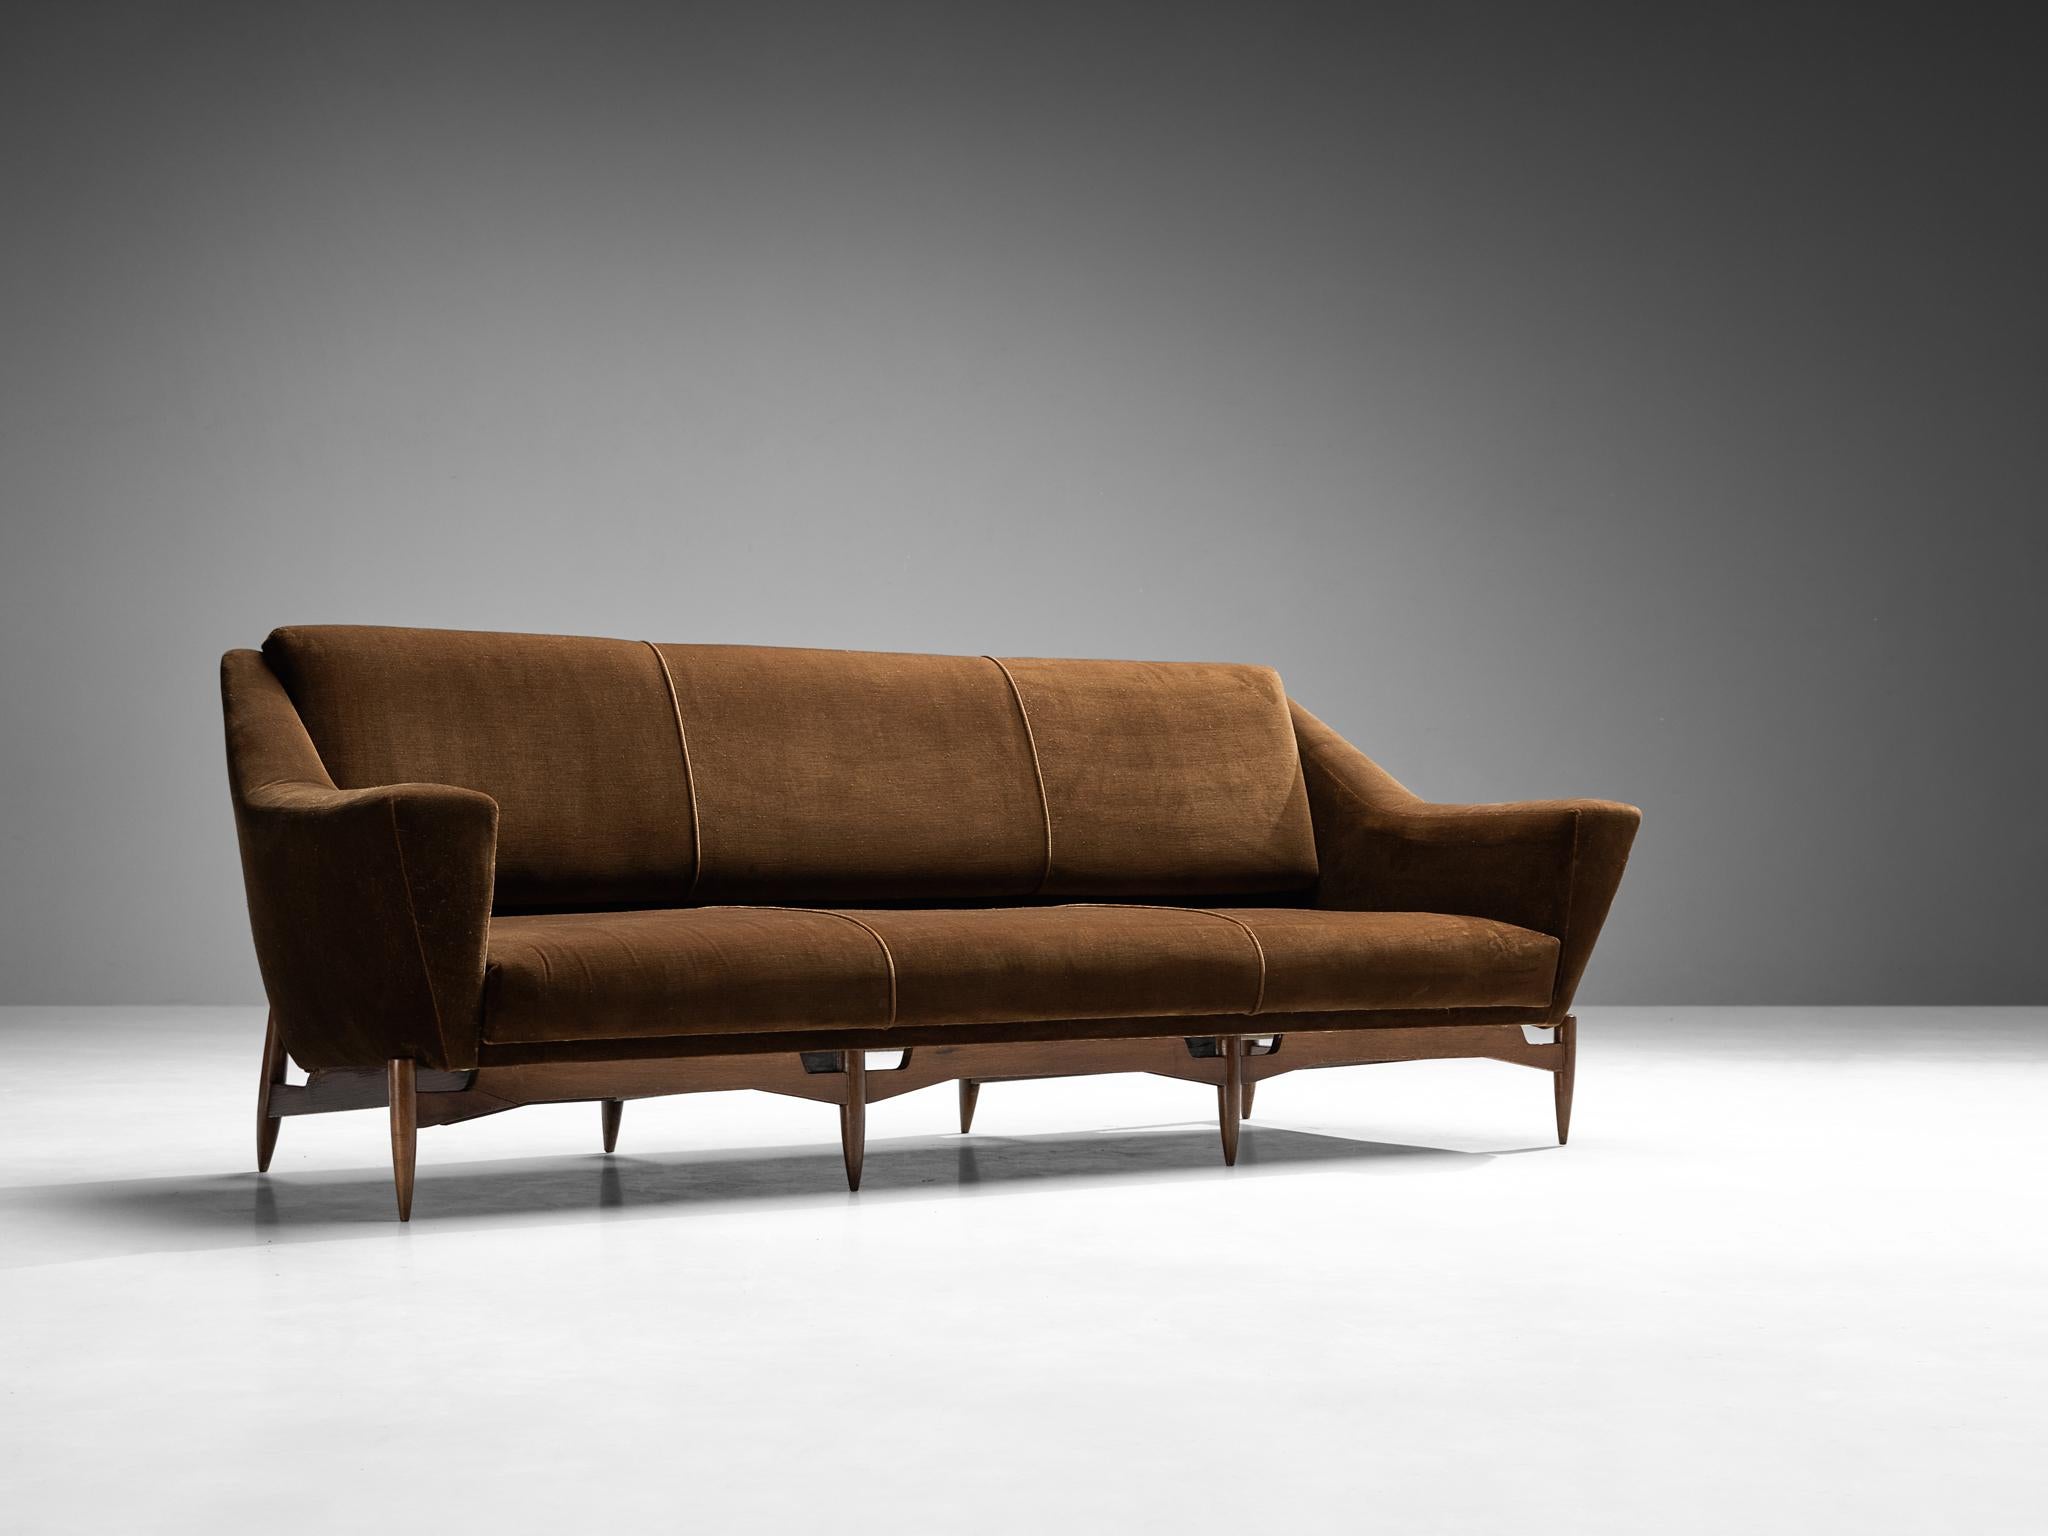 Sofa, brown velvet, stained beech, Italy, 1950s.

An extremely elegant and flattering three seat sofa, made in Italy in the 1950s. This sofa instantly reminds of the work of some prominent Italian designers that were active in that period, like